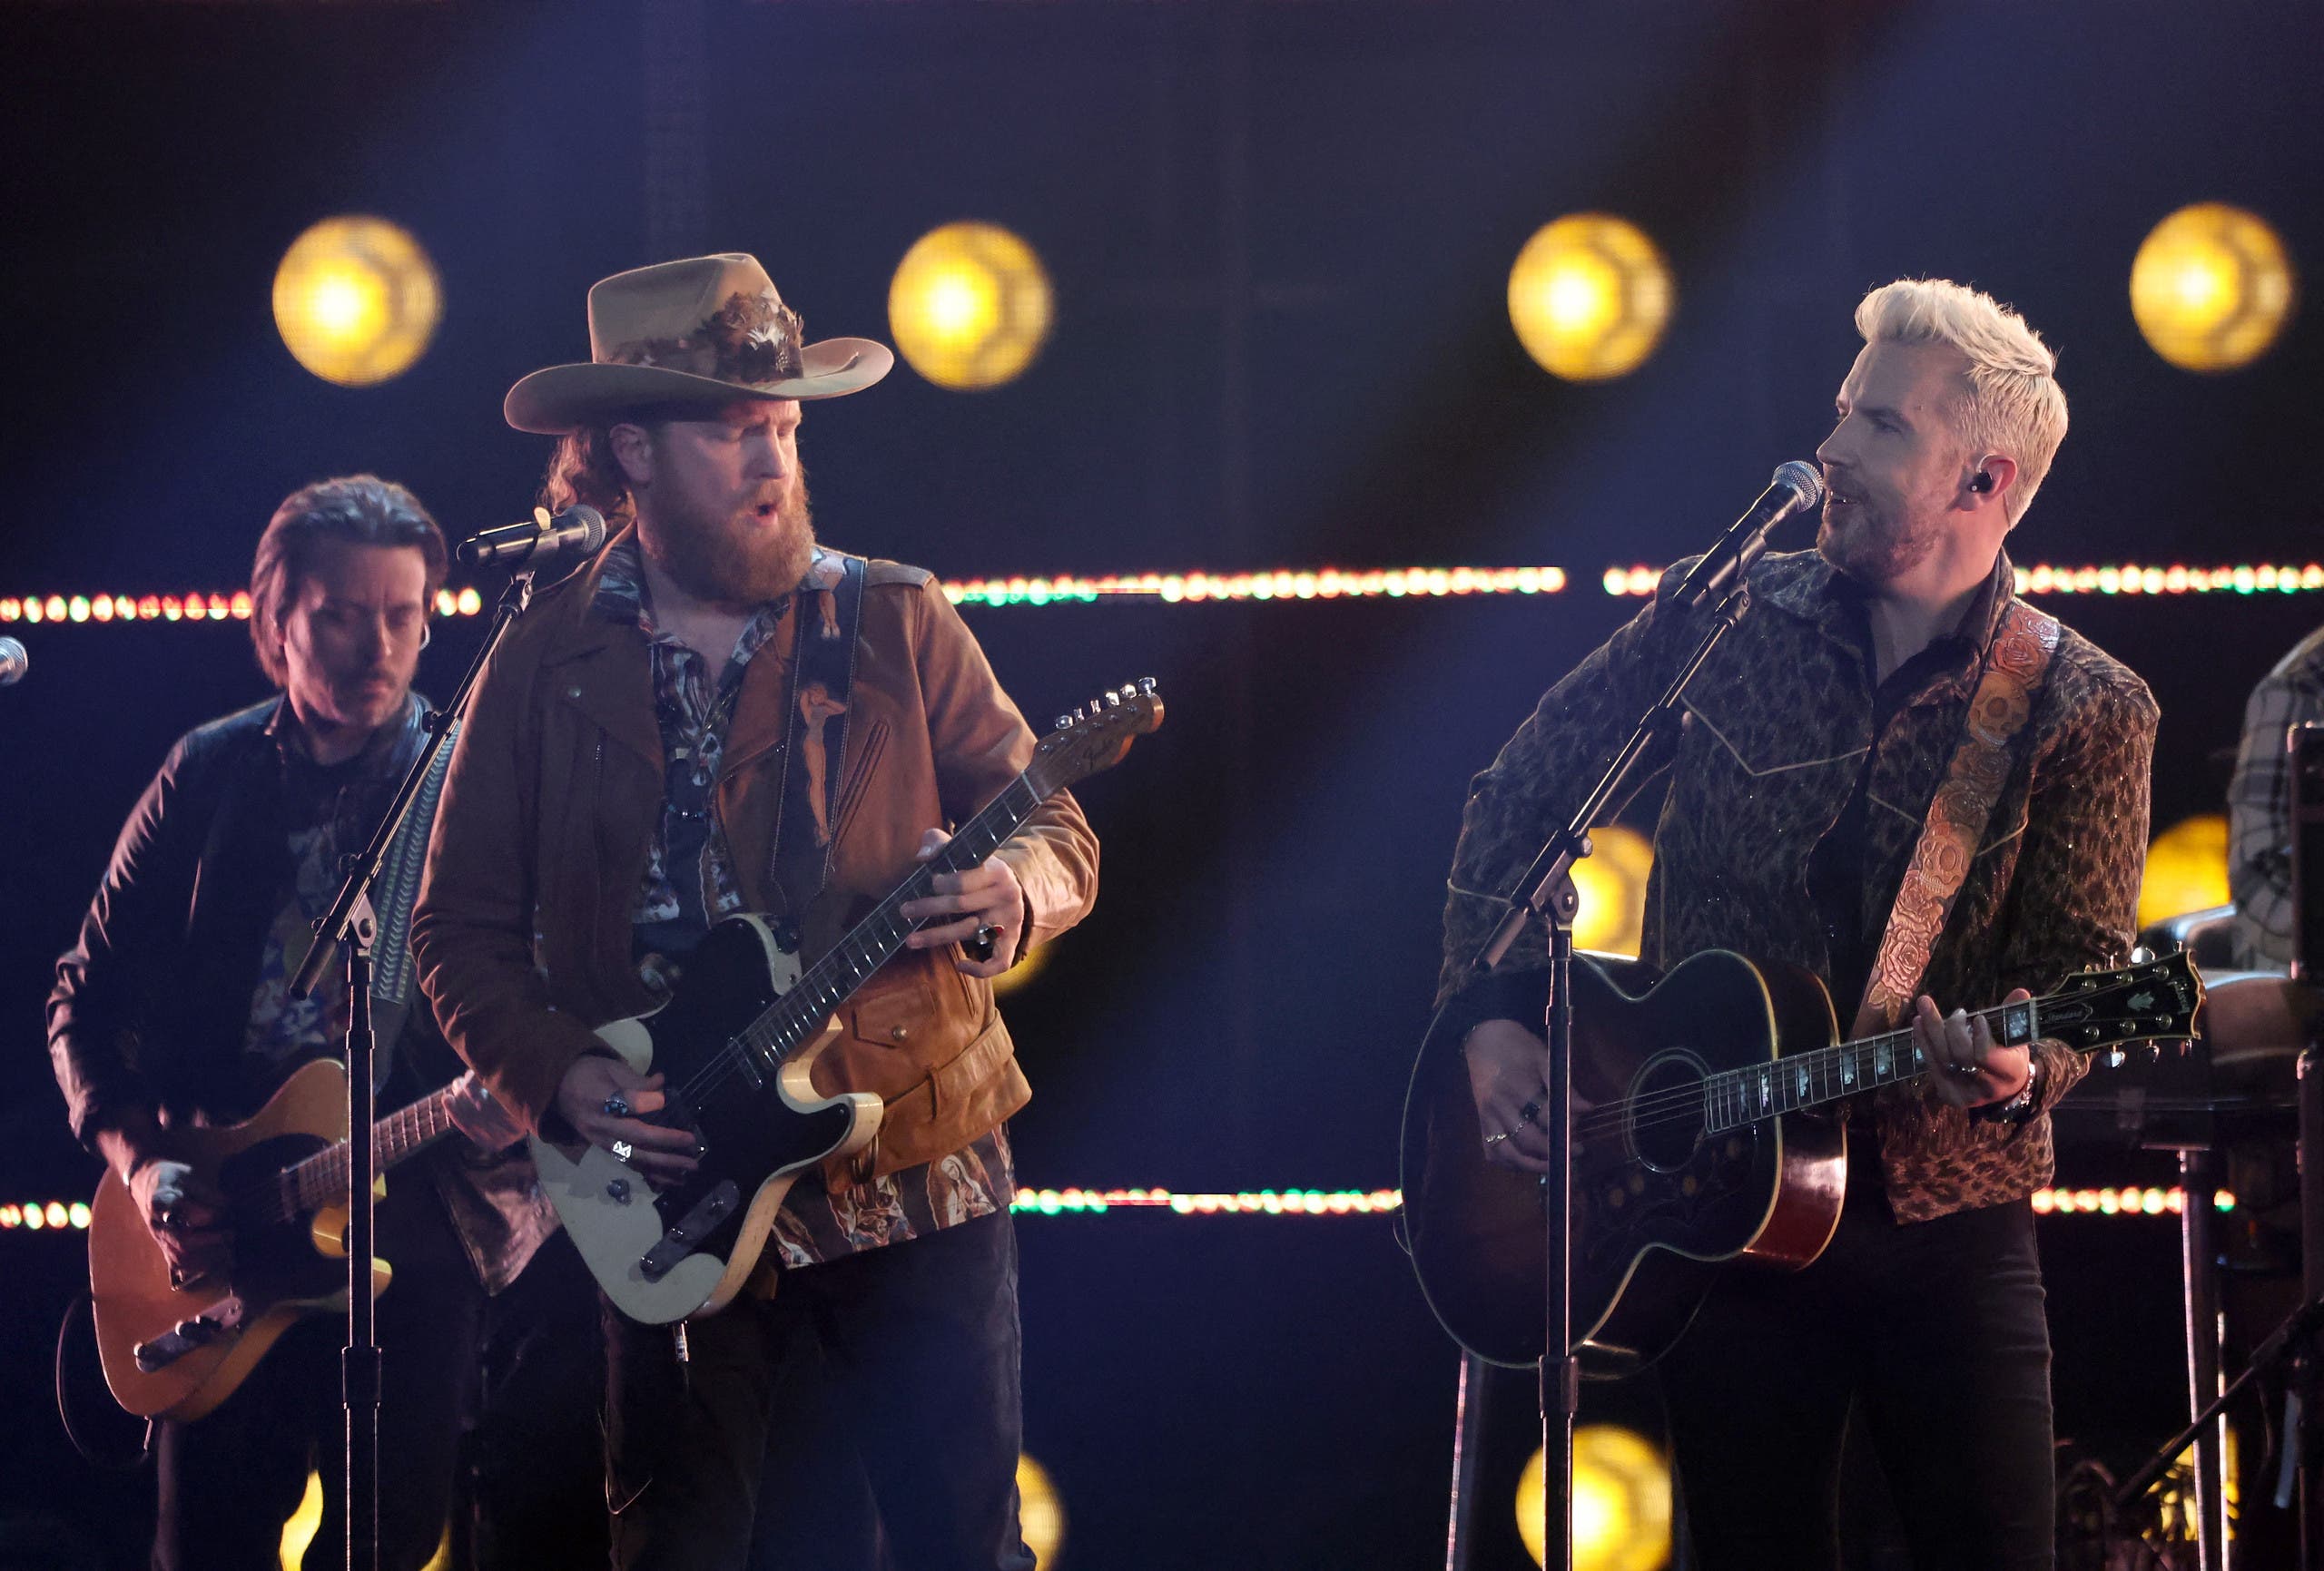 The Brothers Osborne perform during the 64th Annual Grammy Awards show in Las Vegas, Nevada, US April 3, 2022. (Reuters)